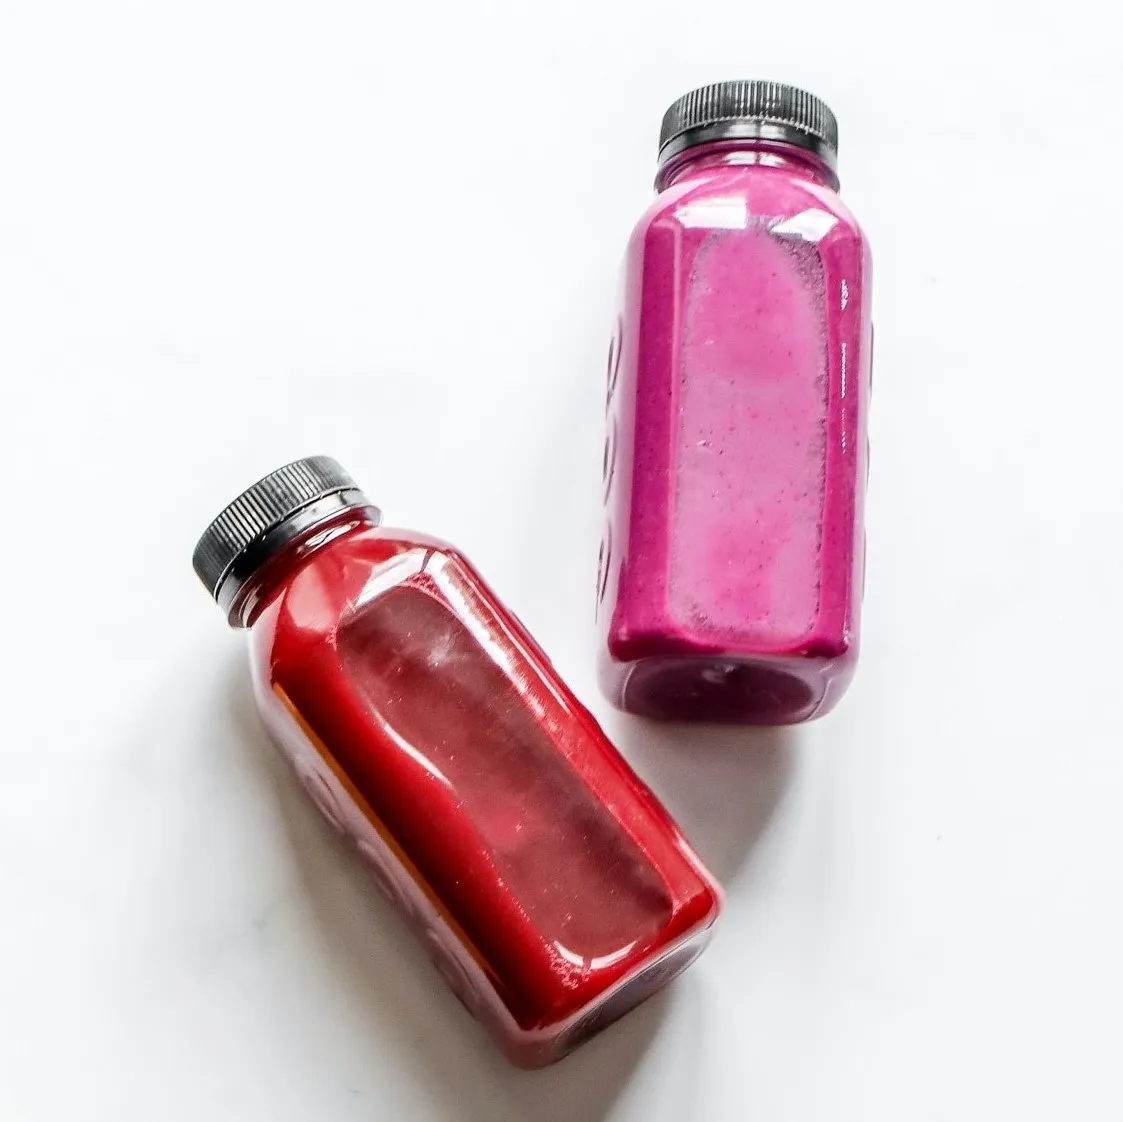 Two bottles with pink content lying on white surface